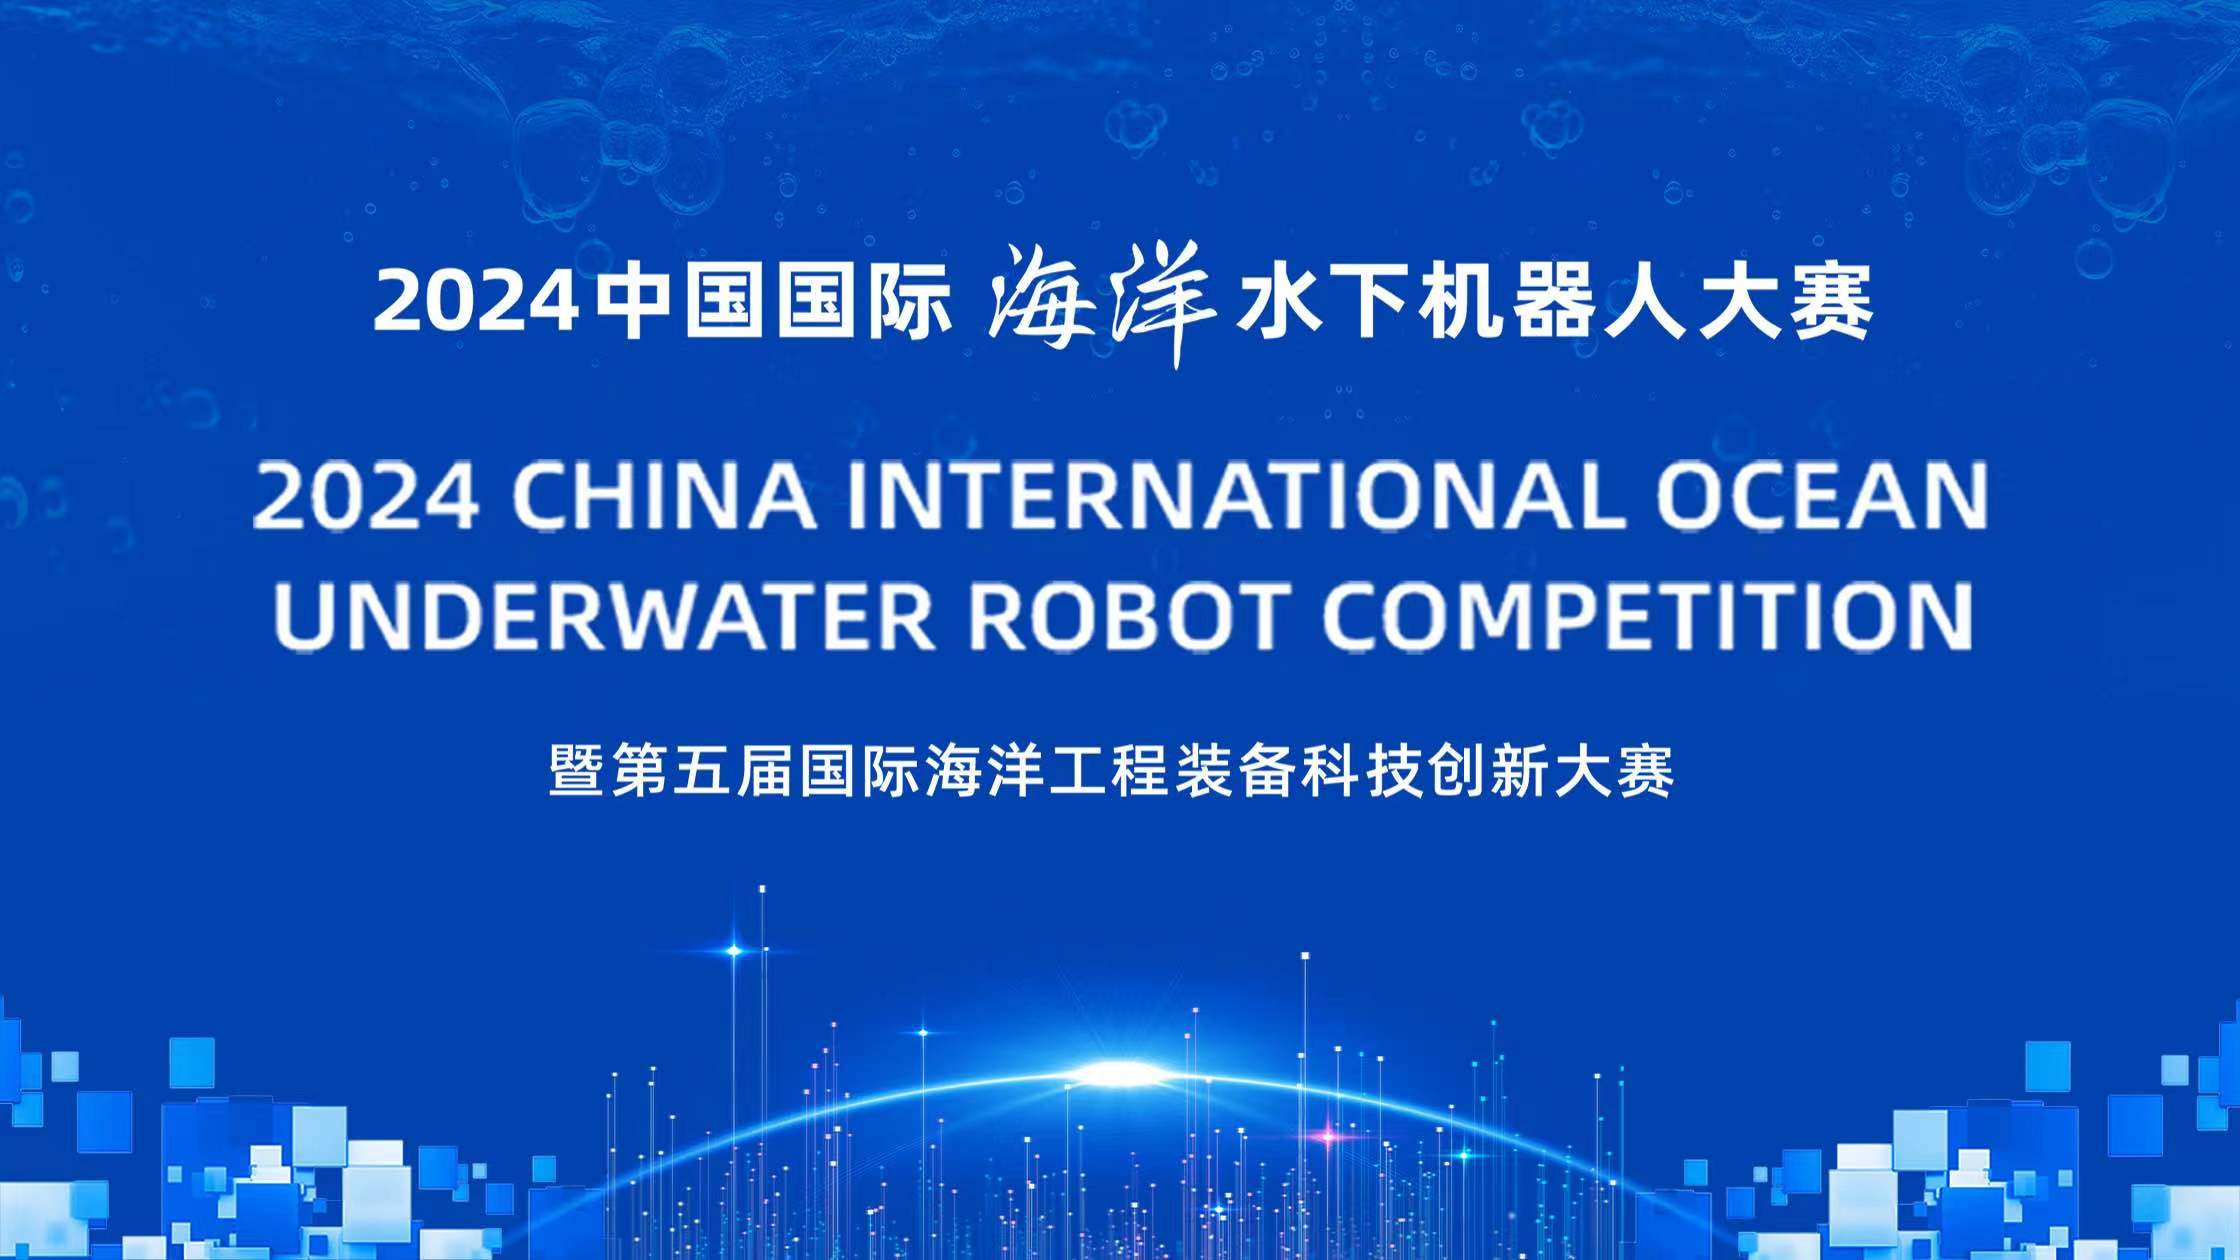 Live: The 2024 China International Ocean Underwater Robot Competition